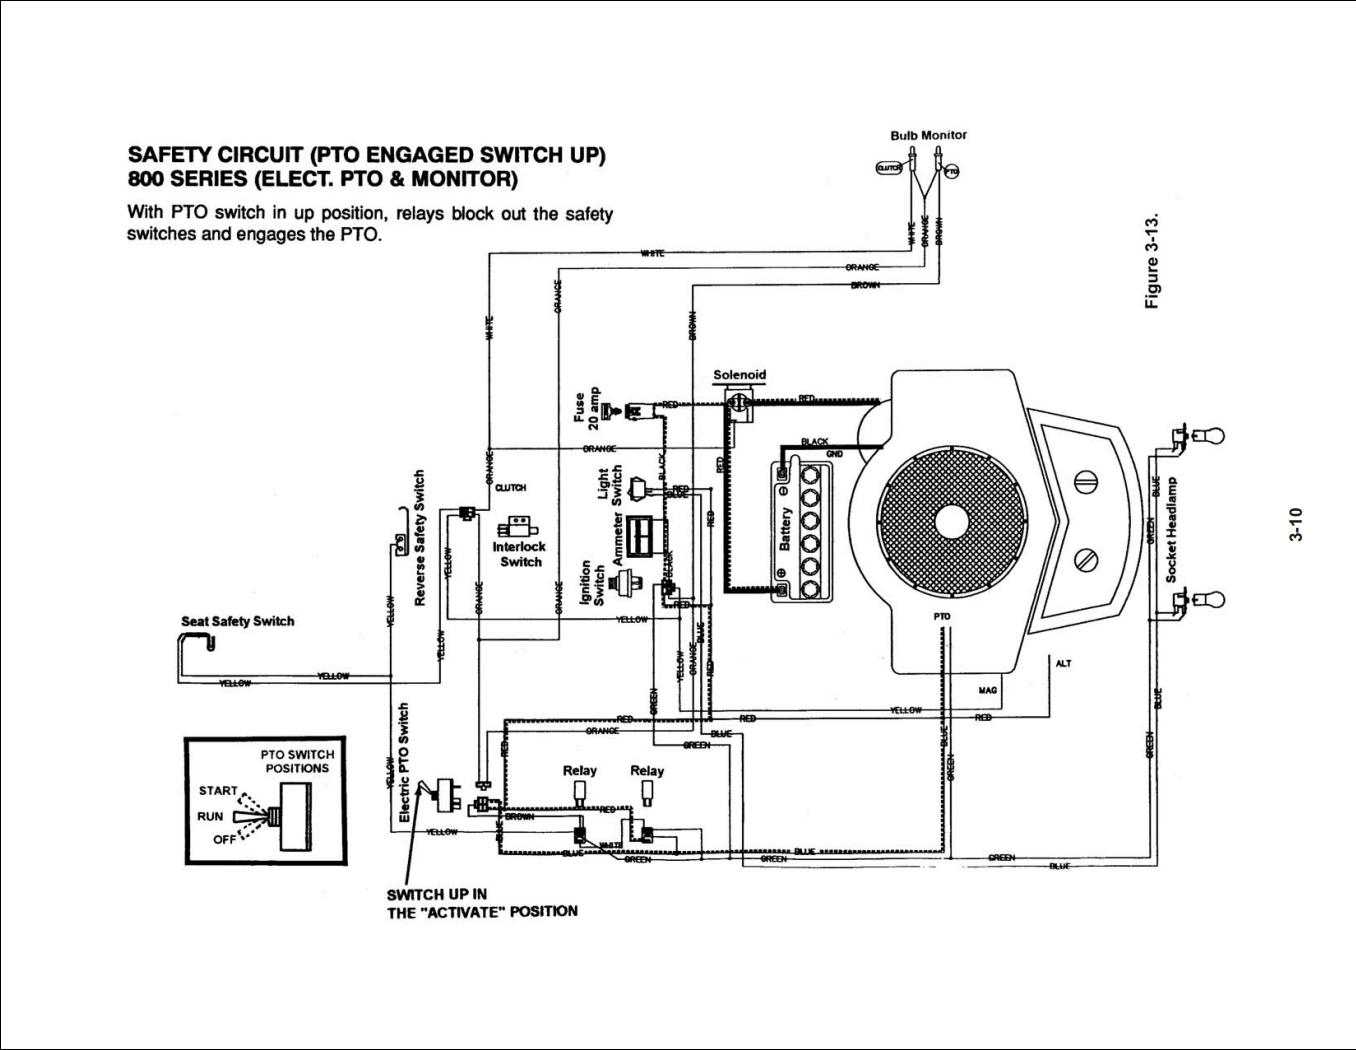 Huskee Lawn Mower Parts Diagram Wiring Diagram For Huskee Riding Mower Get Free Image About Wiring